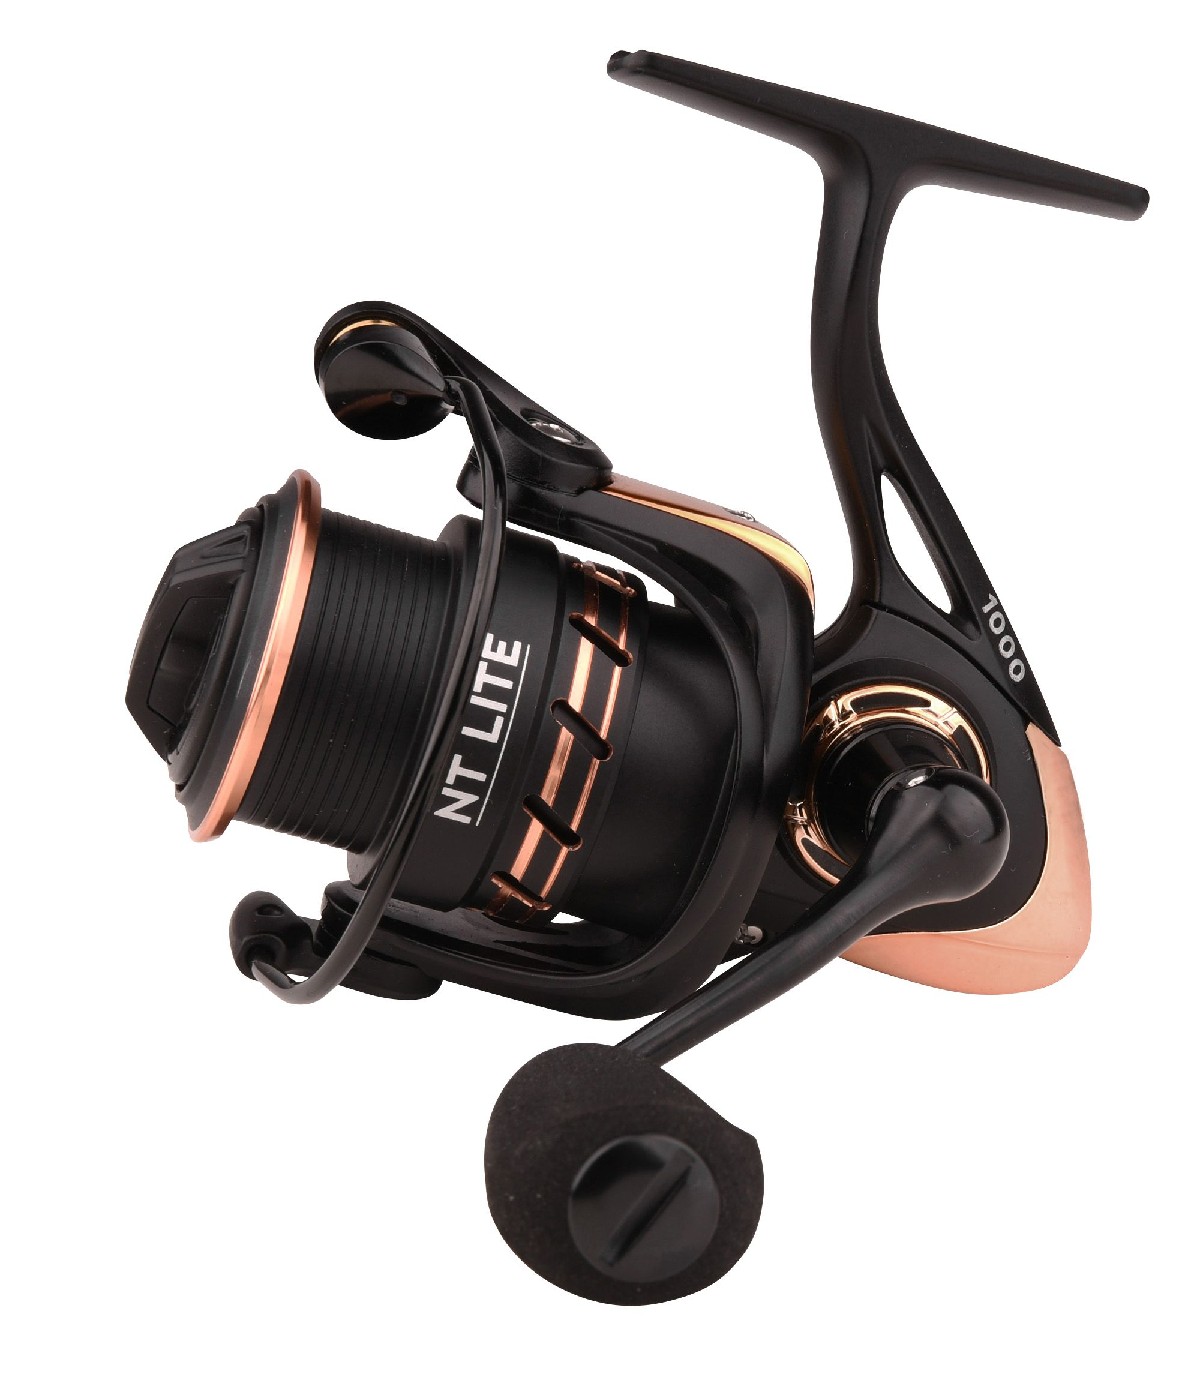 Spro Troutmaster NT Lite Reel 1500